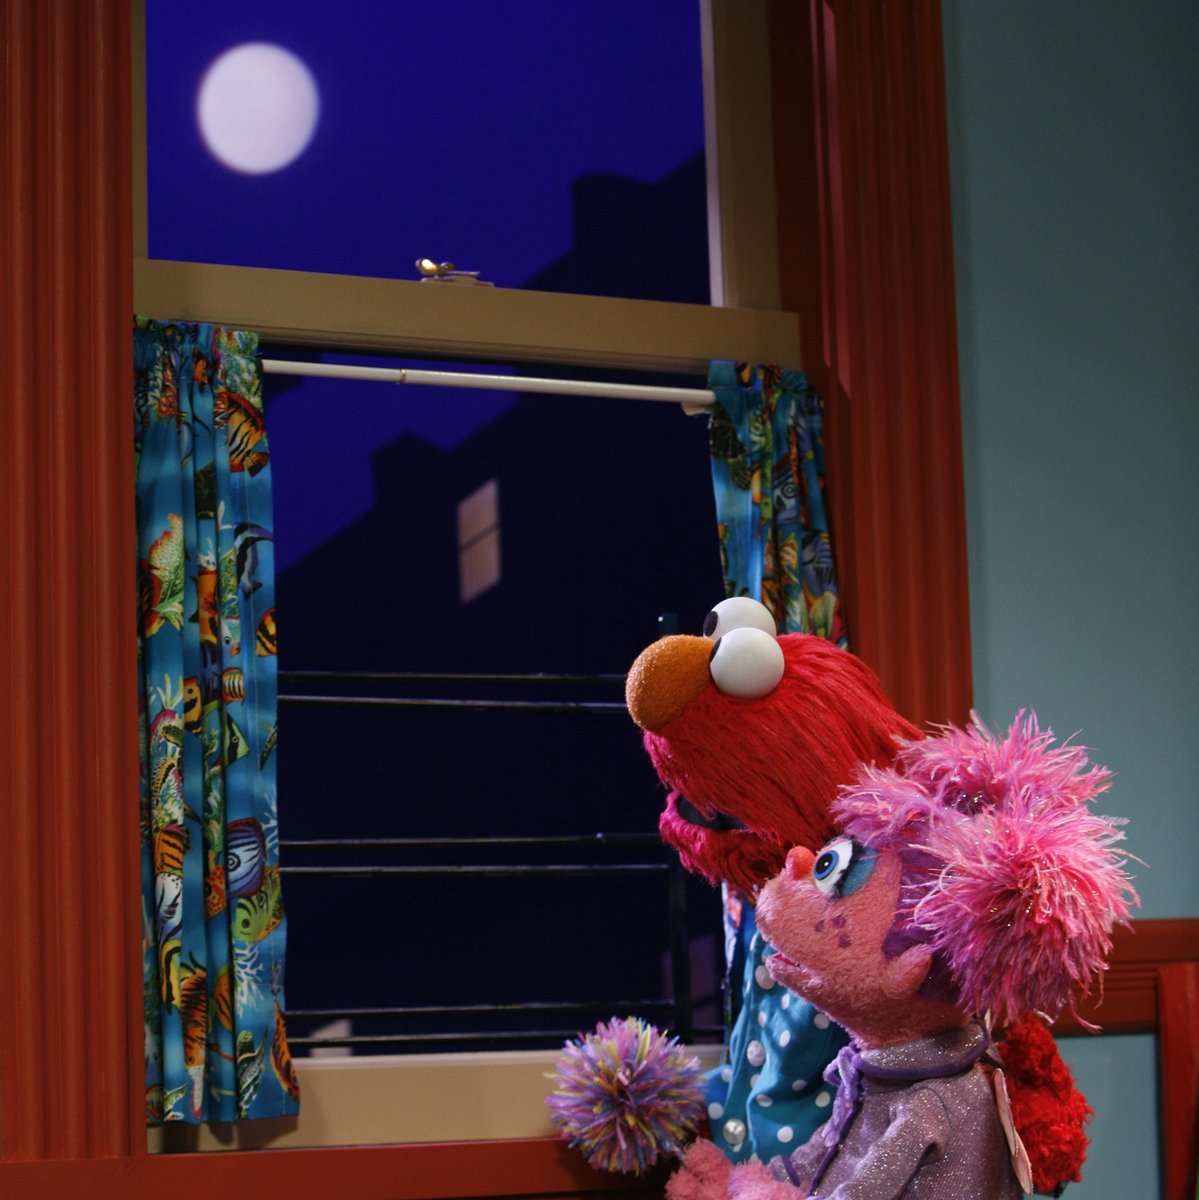 Sesame Street on Twitter "August slipped away into a moment in time